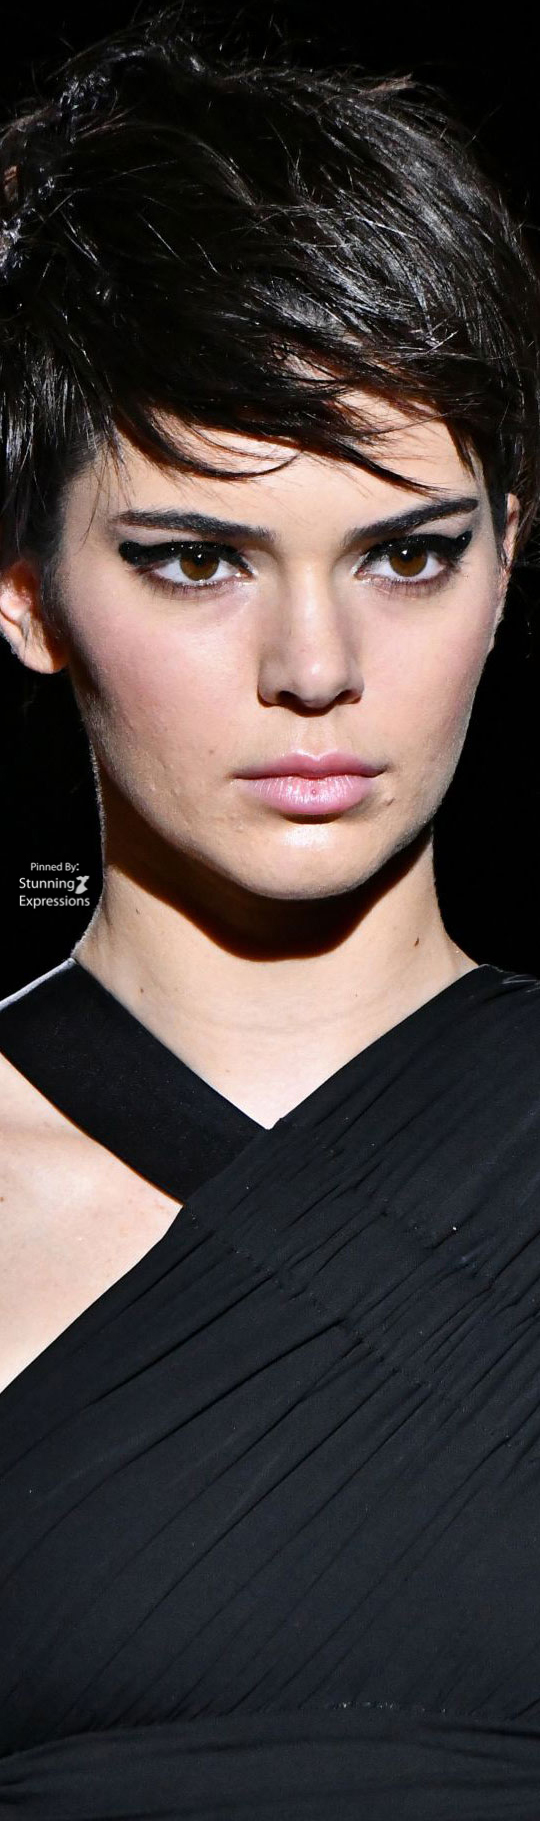 Kendall Jenner | – Stunning Expressions